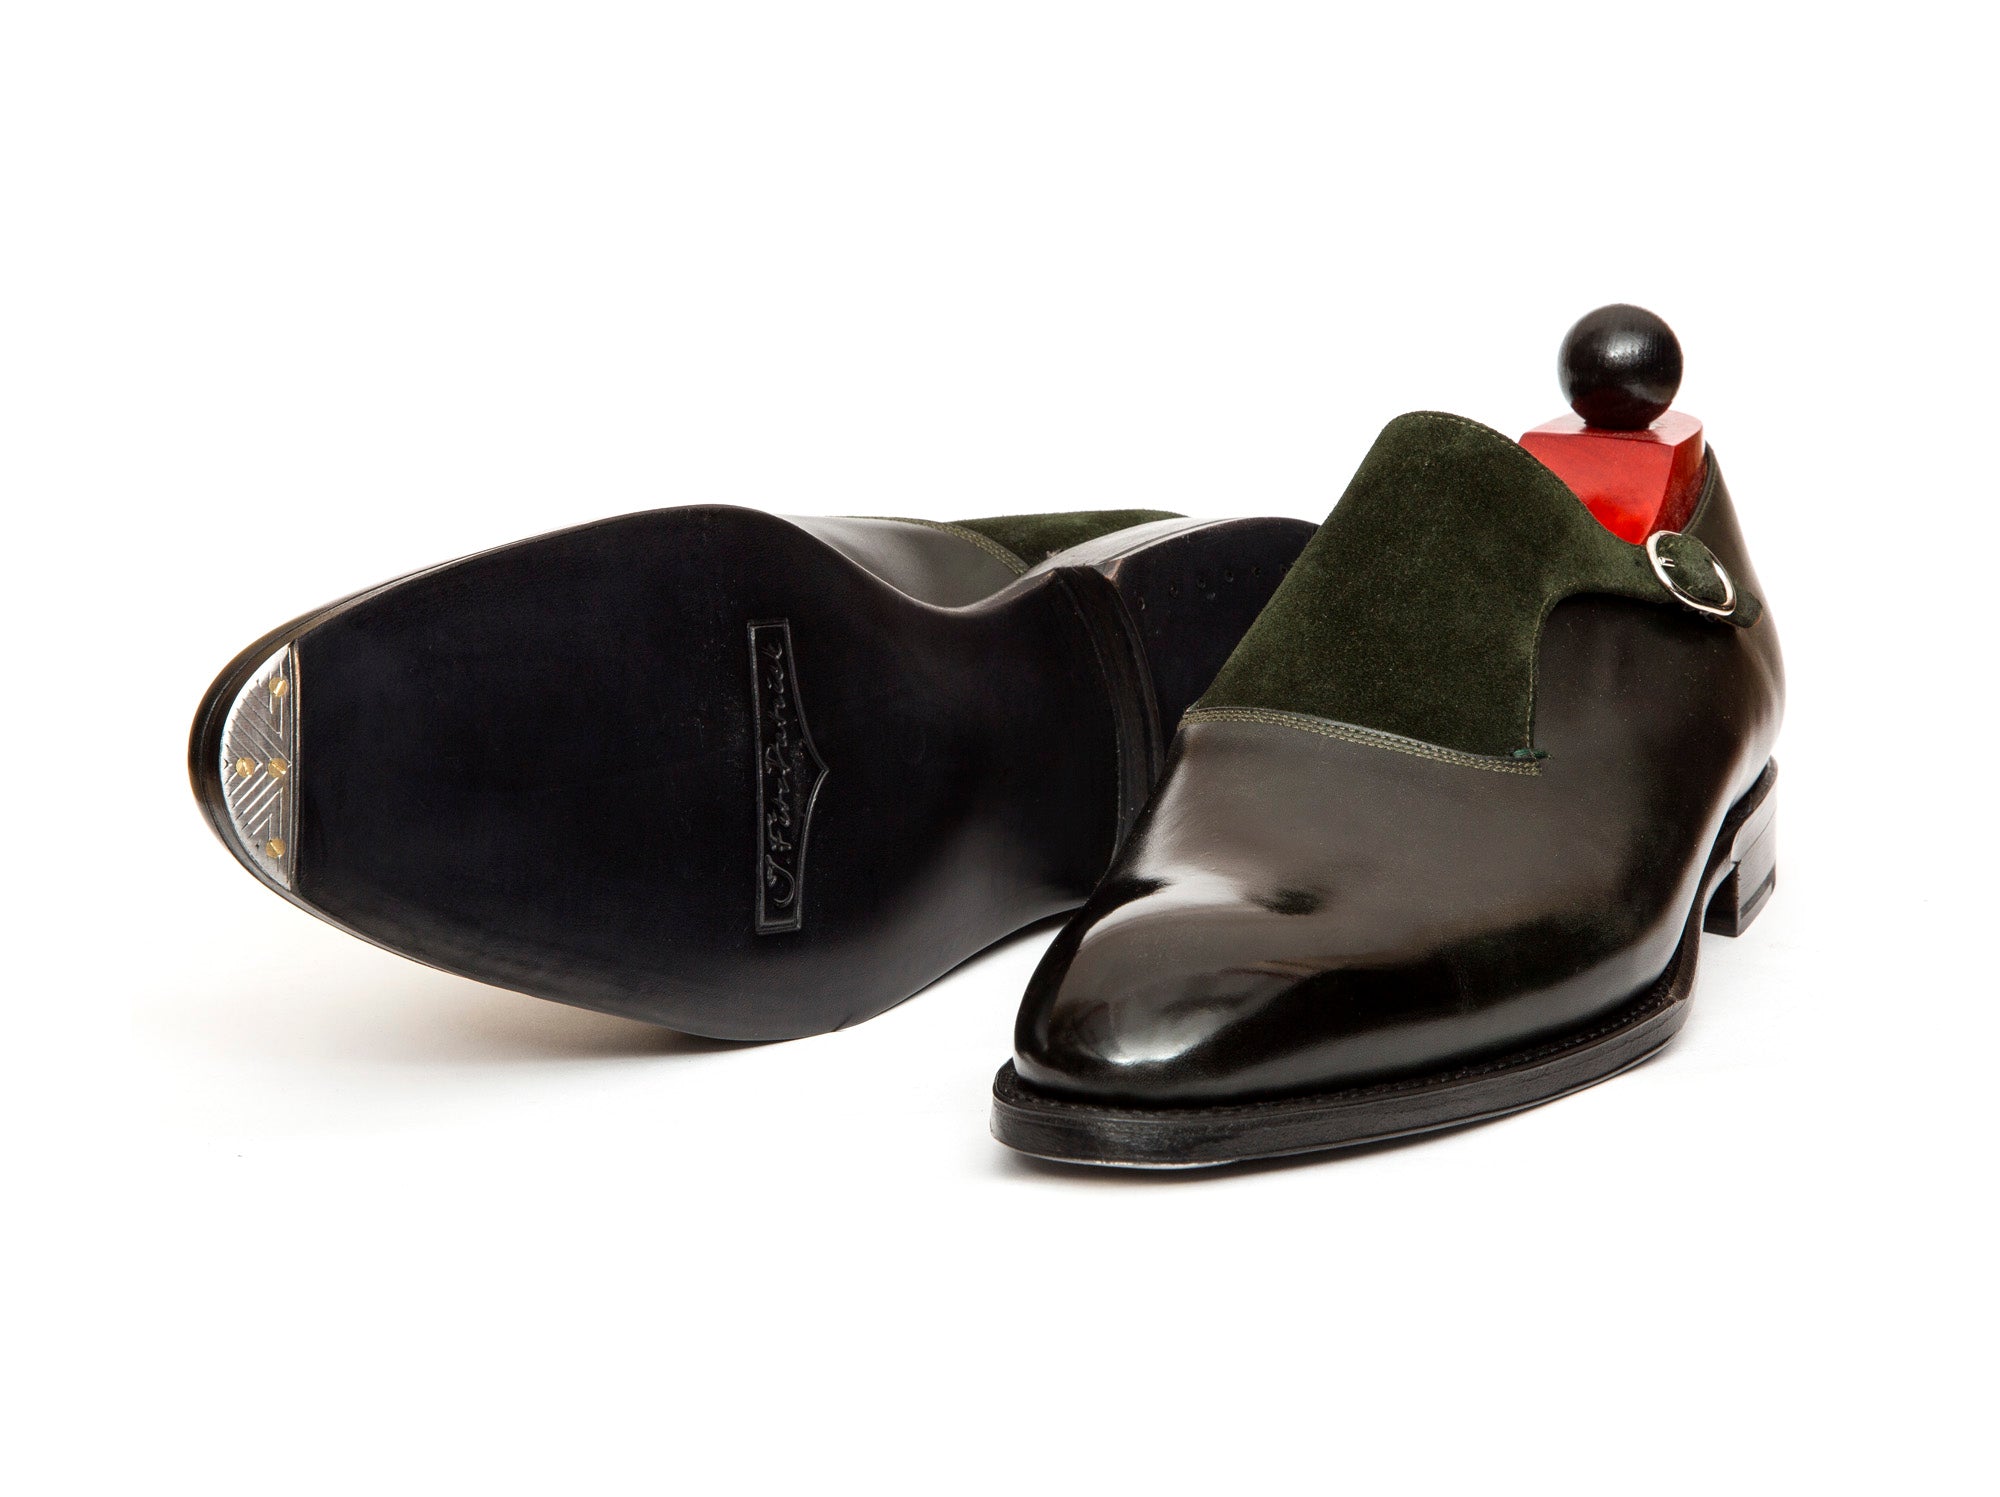 Madrona - MTO - Dark Green Museum Calf / Forest Green Suede - NGT Last - Single Leather Sole